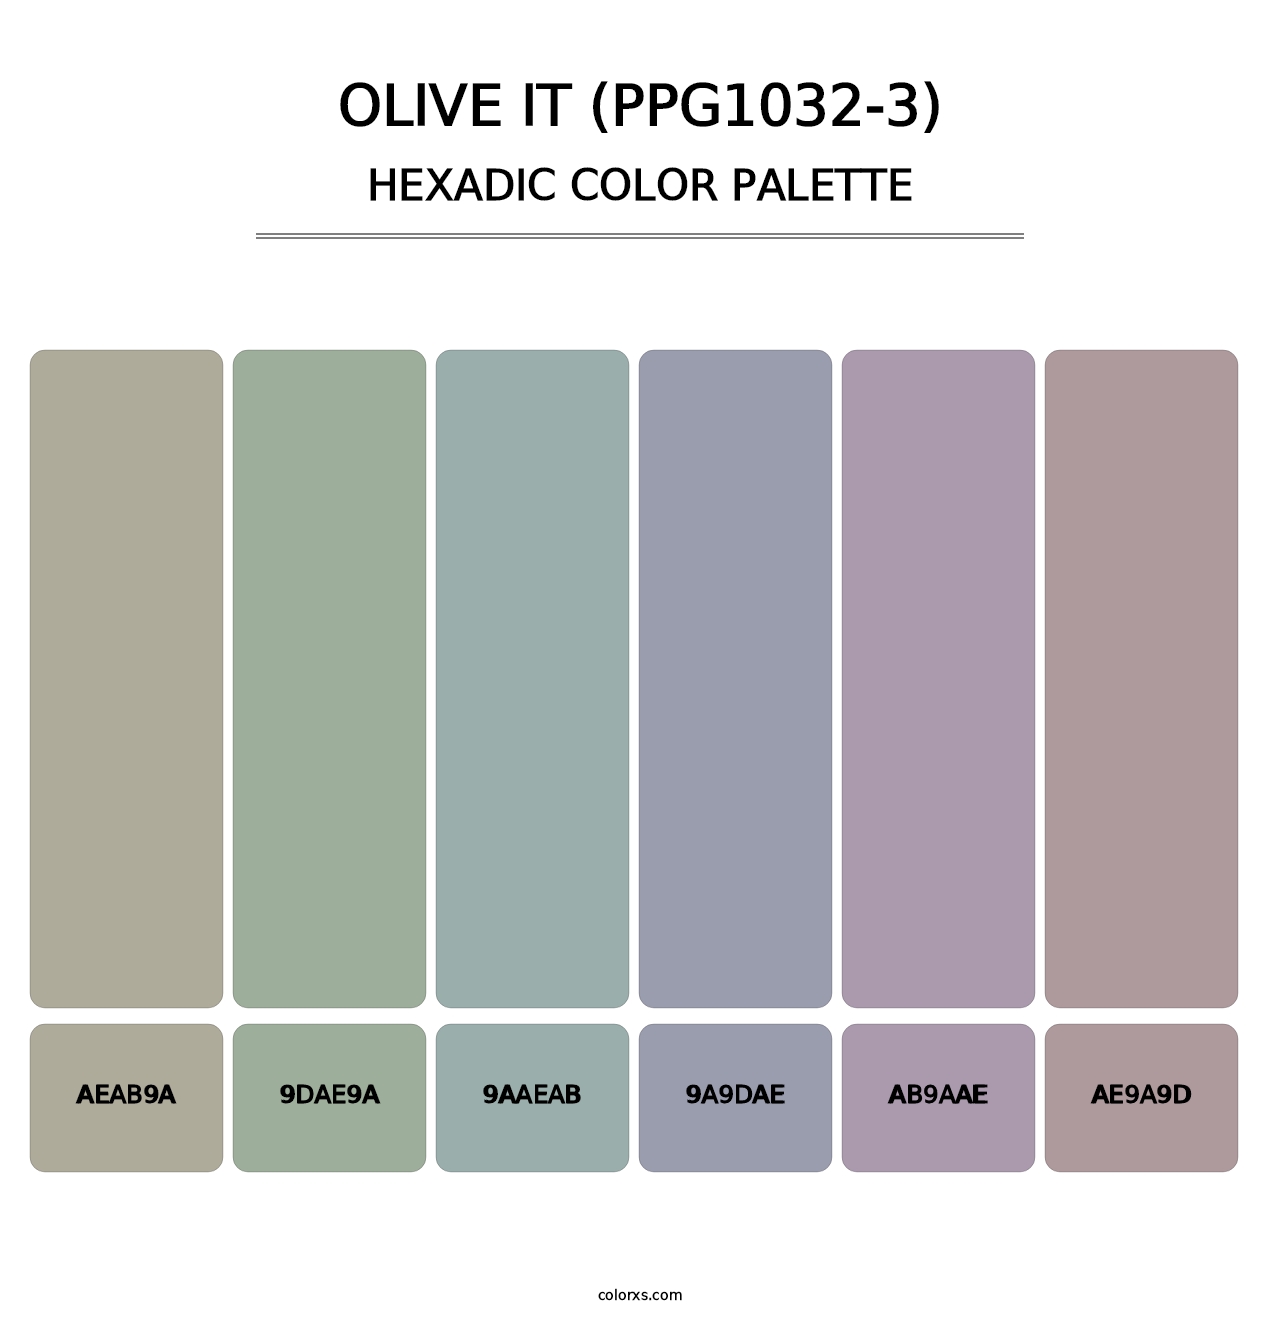 Olive It (PPG1032-3) - Hexadic Color Palette